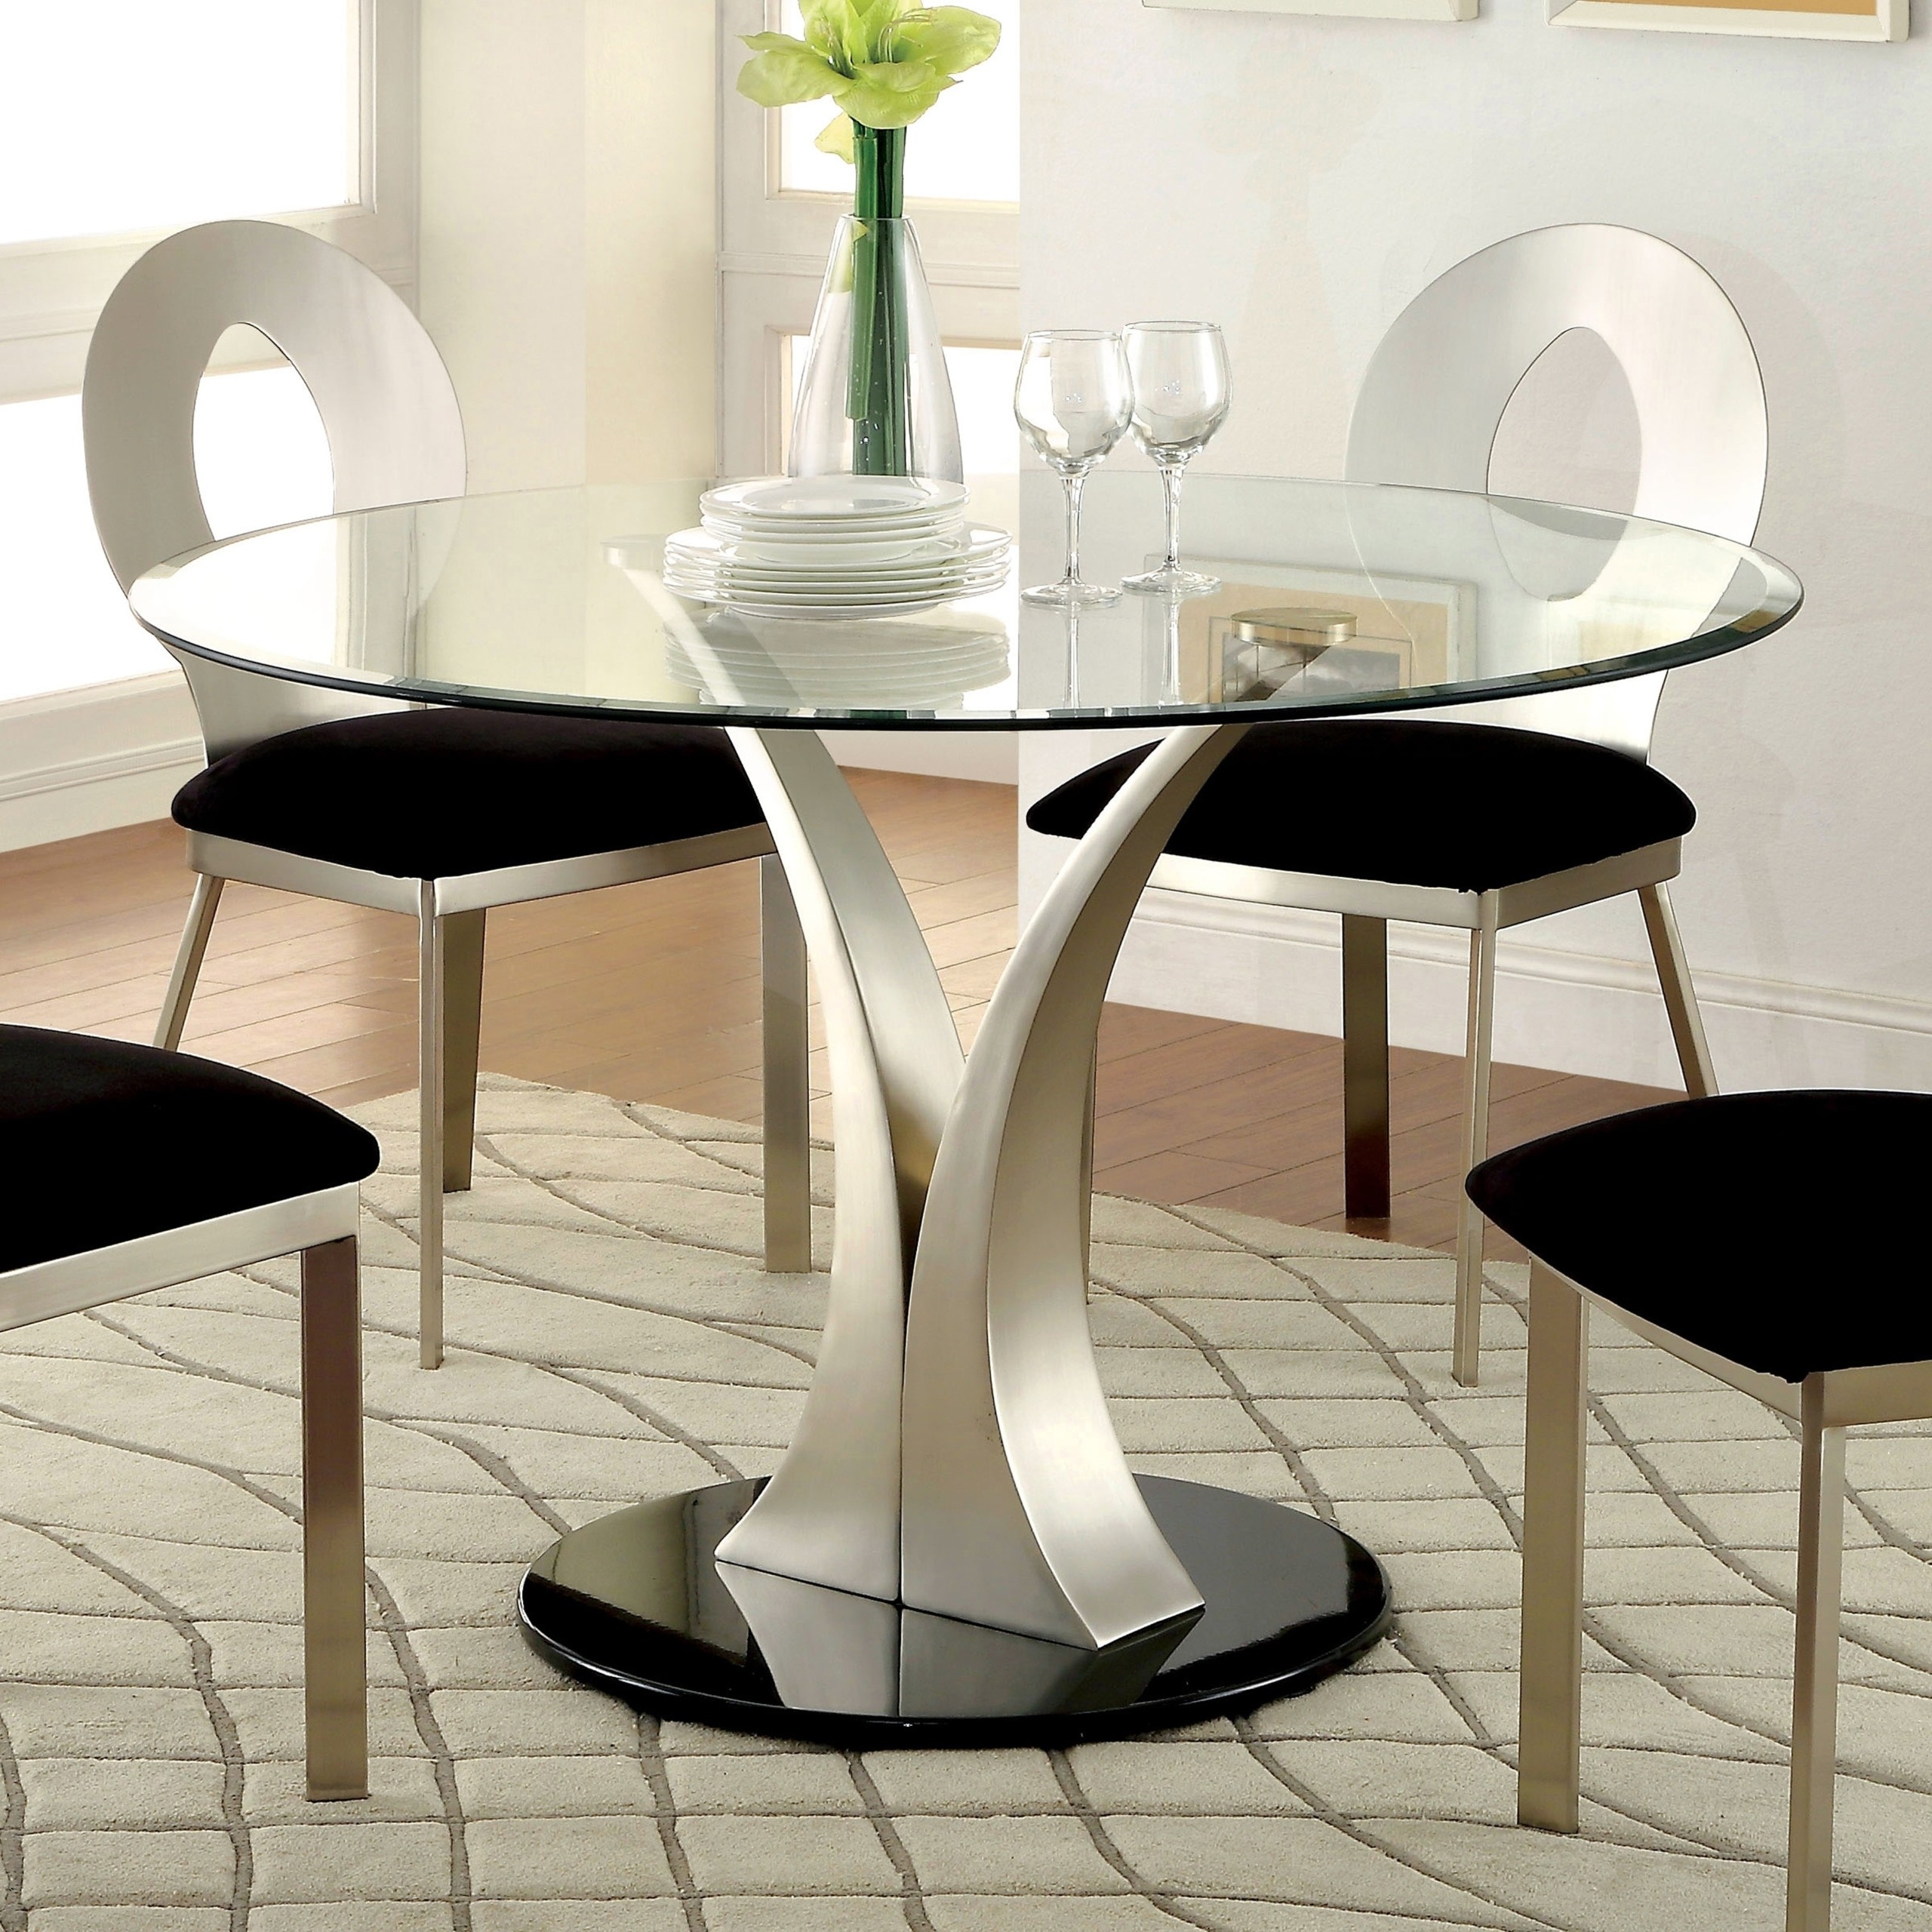 Furniture Of America Sculpture Iii Contemporary Glass Top Round Dining Table